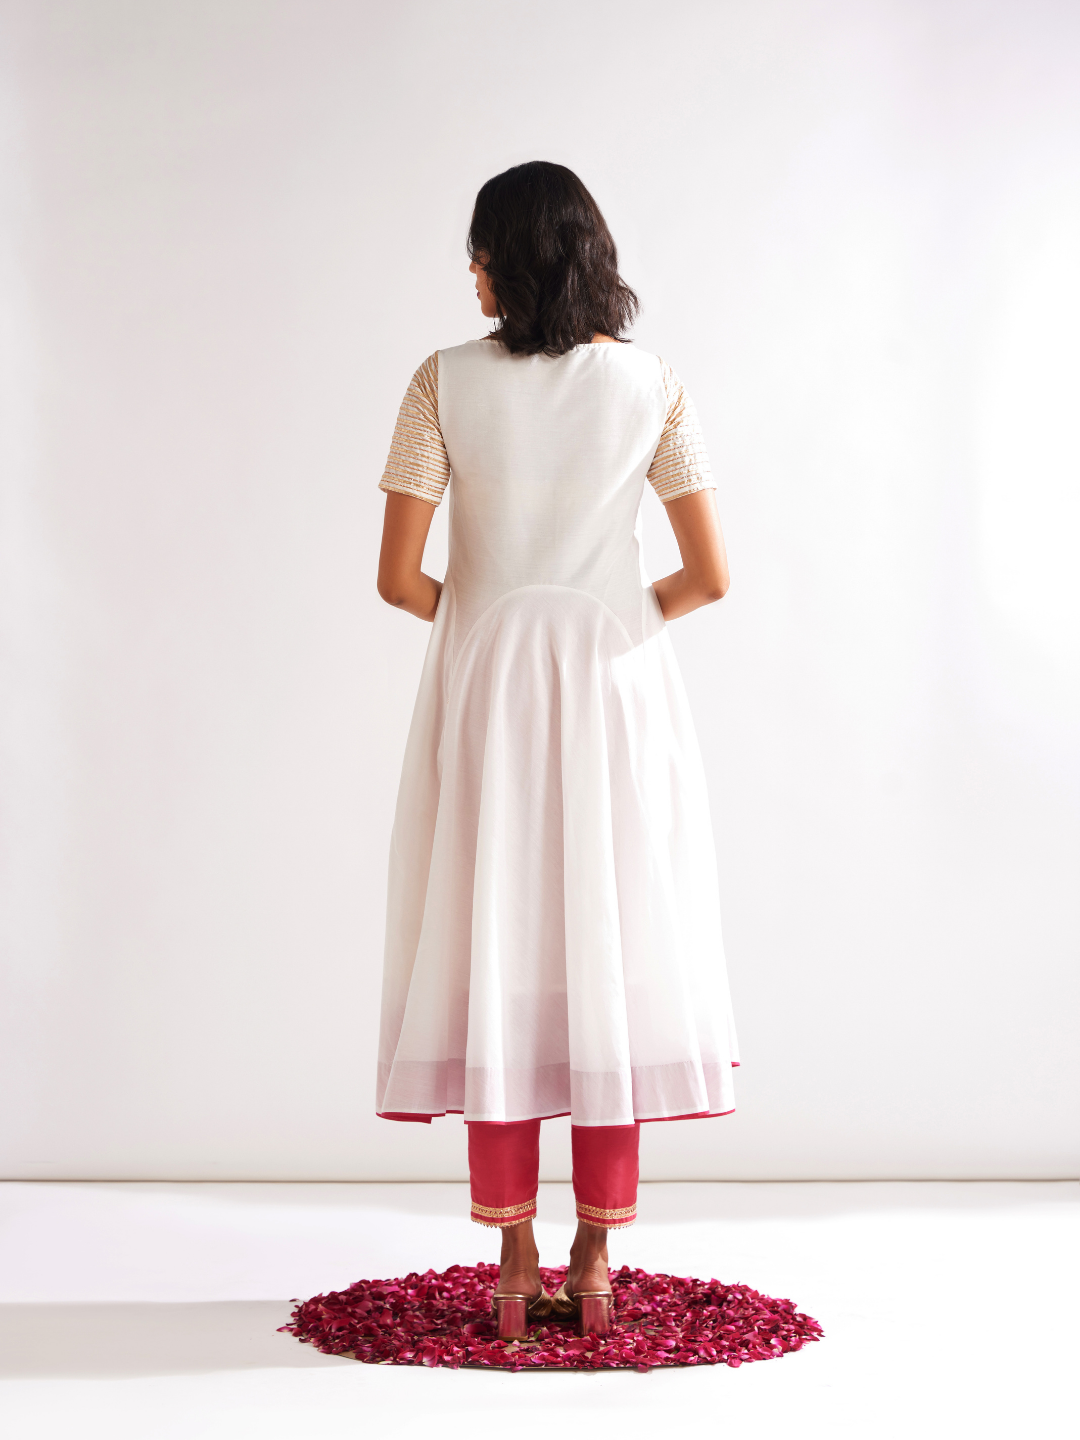 Circular panelled Kurta highlighted with Gota patti yoke paired with pegged pants along with dupatta- Cream